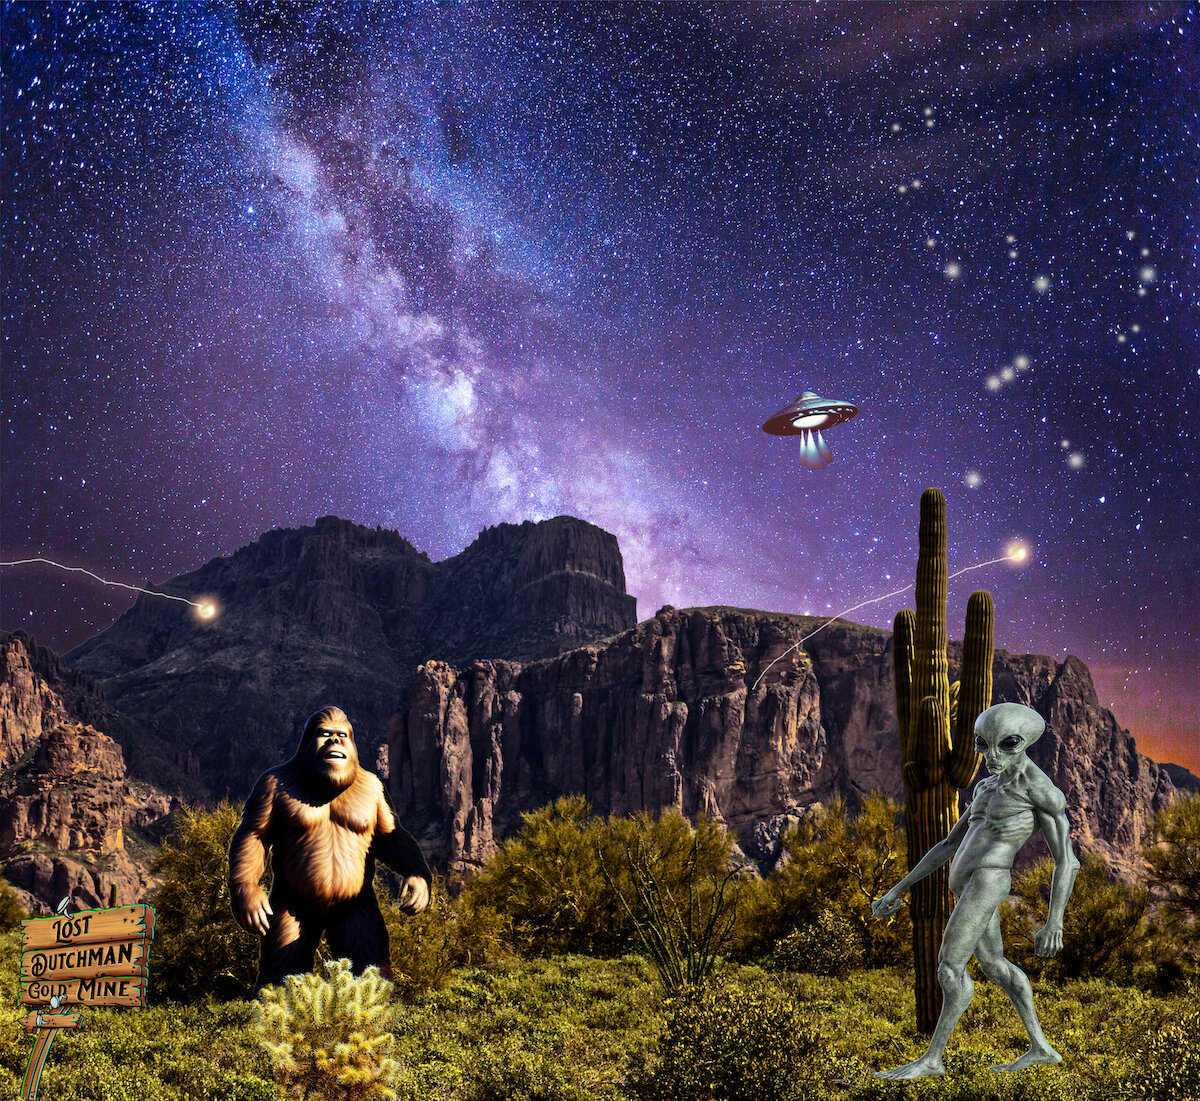 Learn about the mysteries of UFOs, UAPs, Bigfoot, Star People and other unexplained phenomena with a team of paranormal researchers, investigators and enthusiasts Feb. 19-25 at Superstition Mountain & Lost Dutchman Museum, 4087 E. Apache Trail (State Route 88).